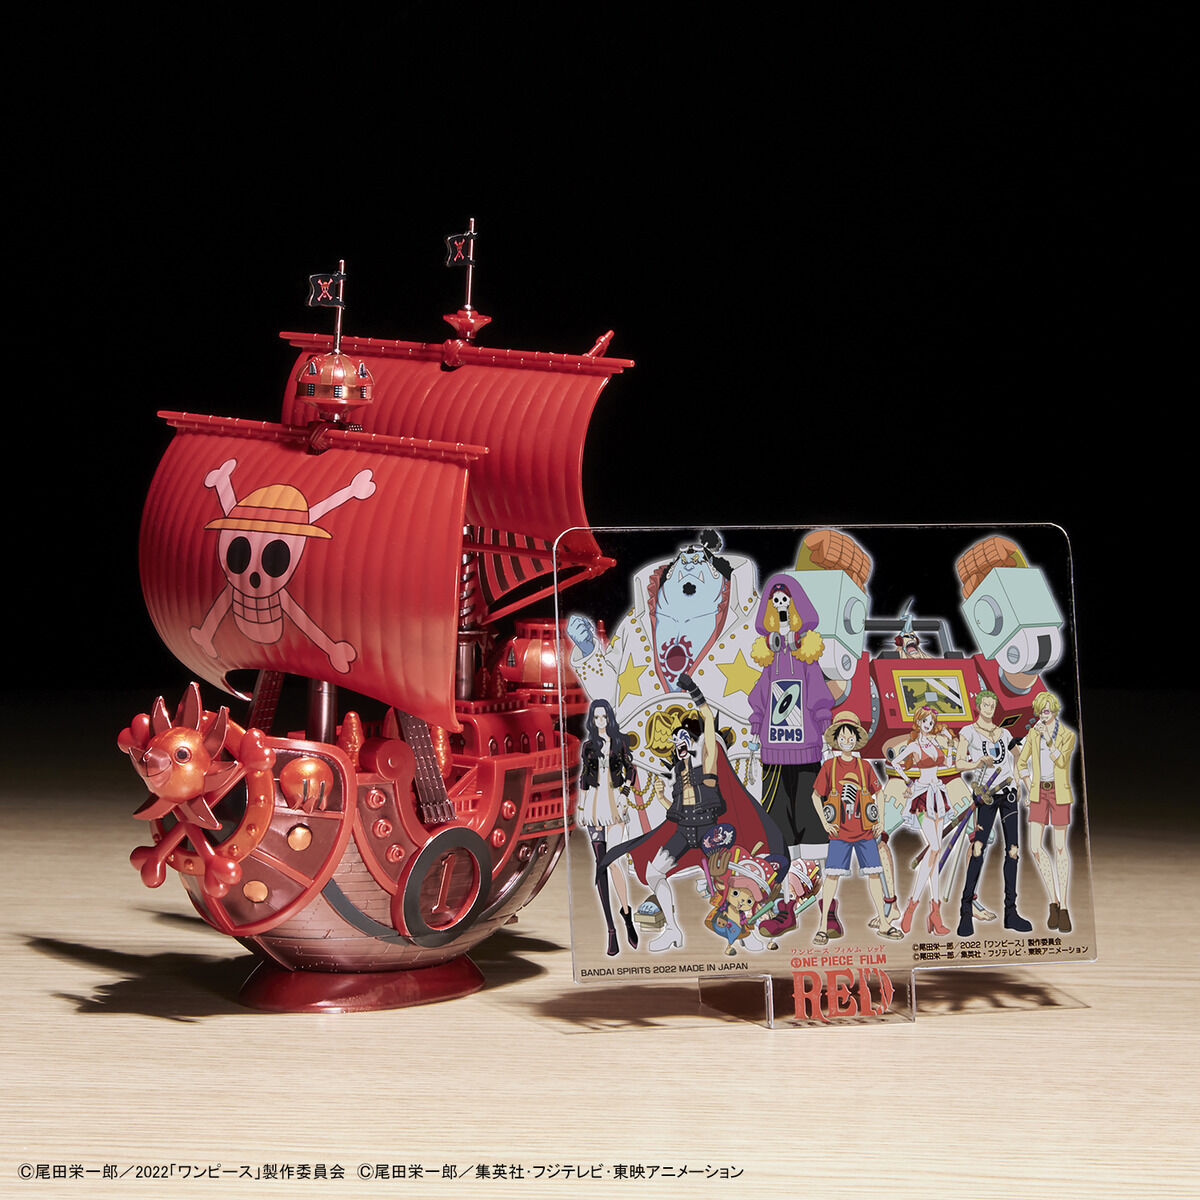 One Piece - Thousand Sunny - RED FILM Special - Grand Ship Collection Model Kit (Bandai), Metallic red color scheme inspired by the film "ONE PIECE FILM RED", includes character plates of the Straw Hat Pirates in movie costumes, display base and sea surface effect included, from Nippon Figures.